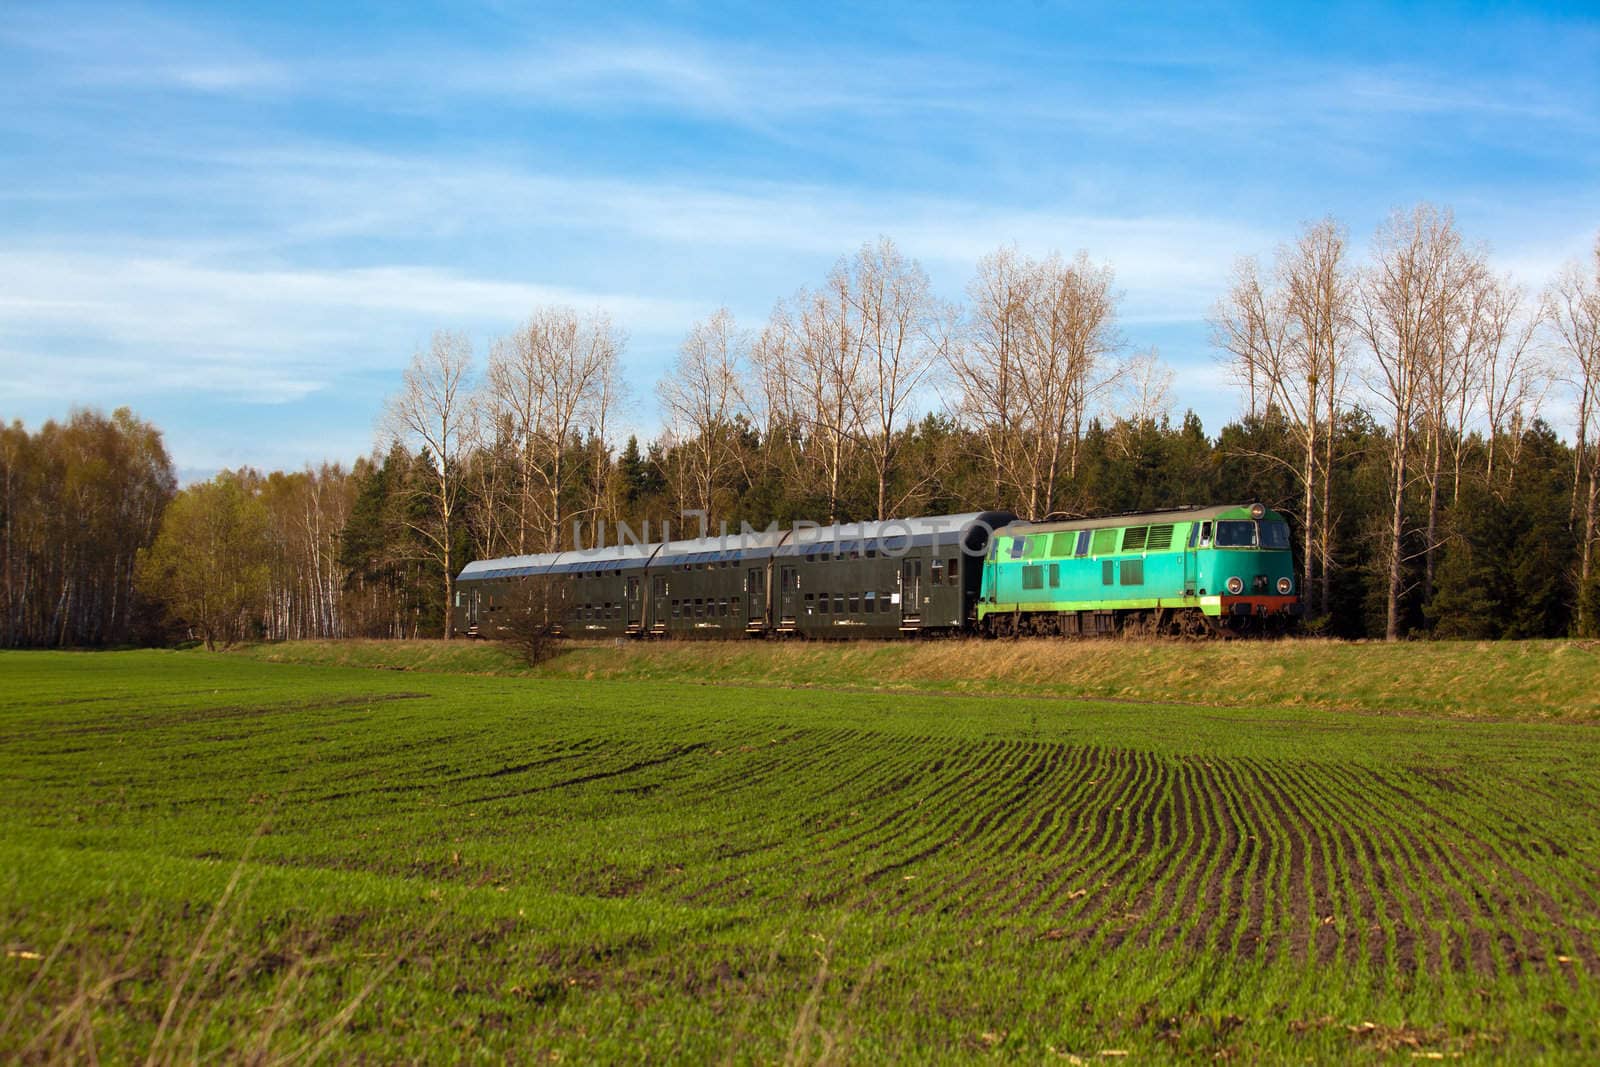 Passenger train hauled by the diesel locomotive passing the sunny landscape
